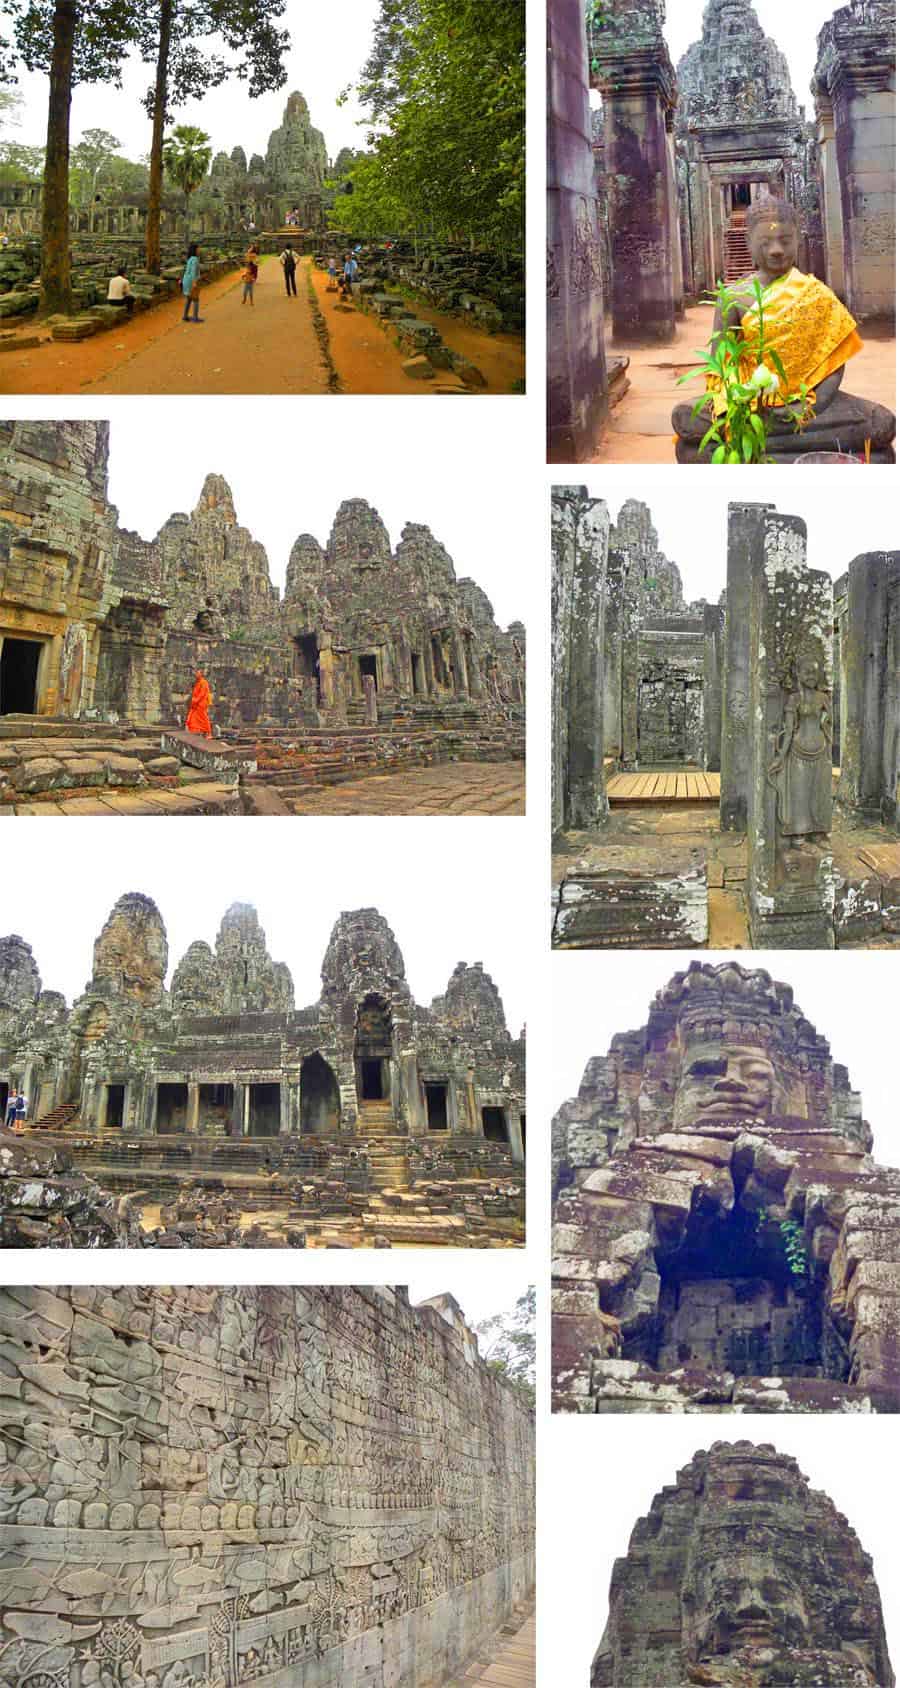 Bayon temple, Angkor, Cambodia. 10 Temples you have to see in Angkor Archaeological Park